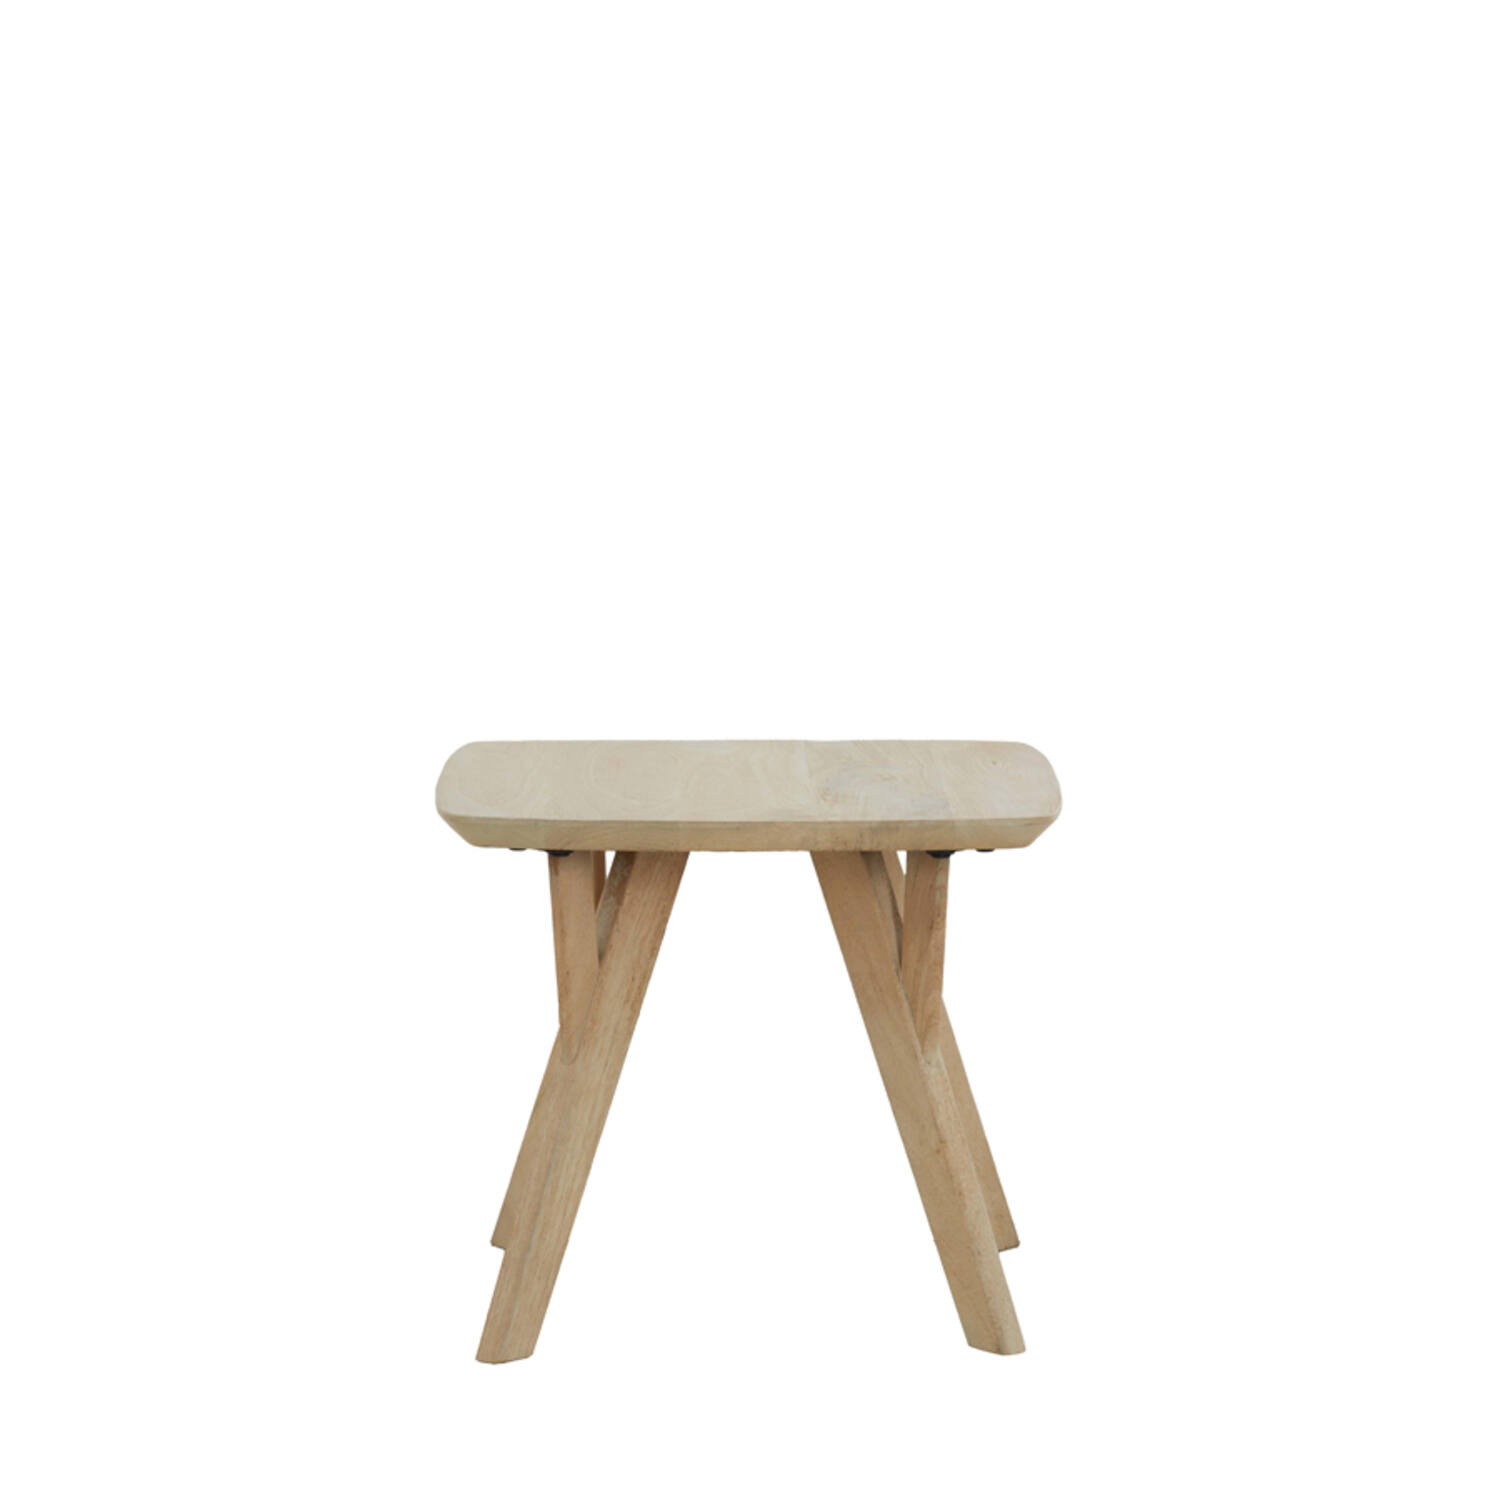 Side table 50x50x42 cm QUENZA mango wood natural